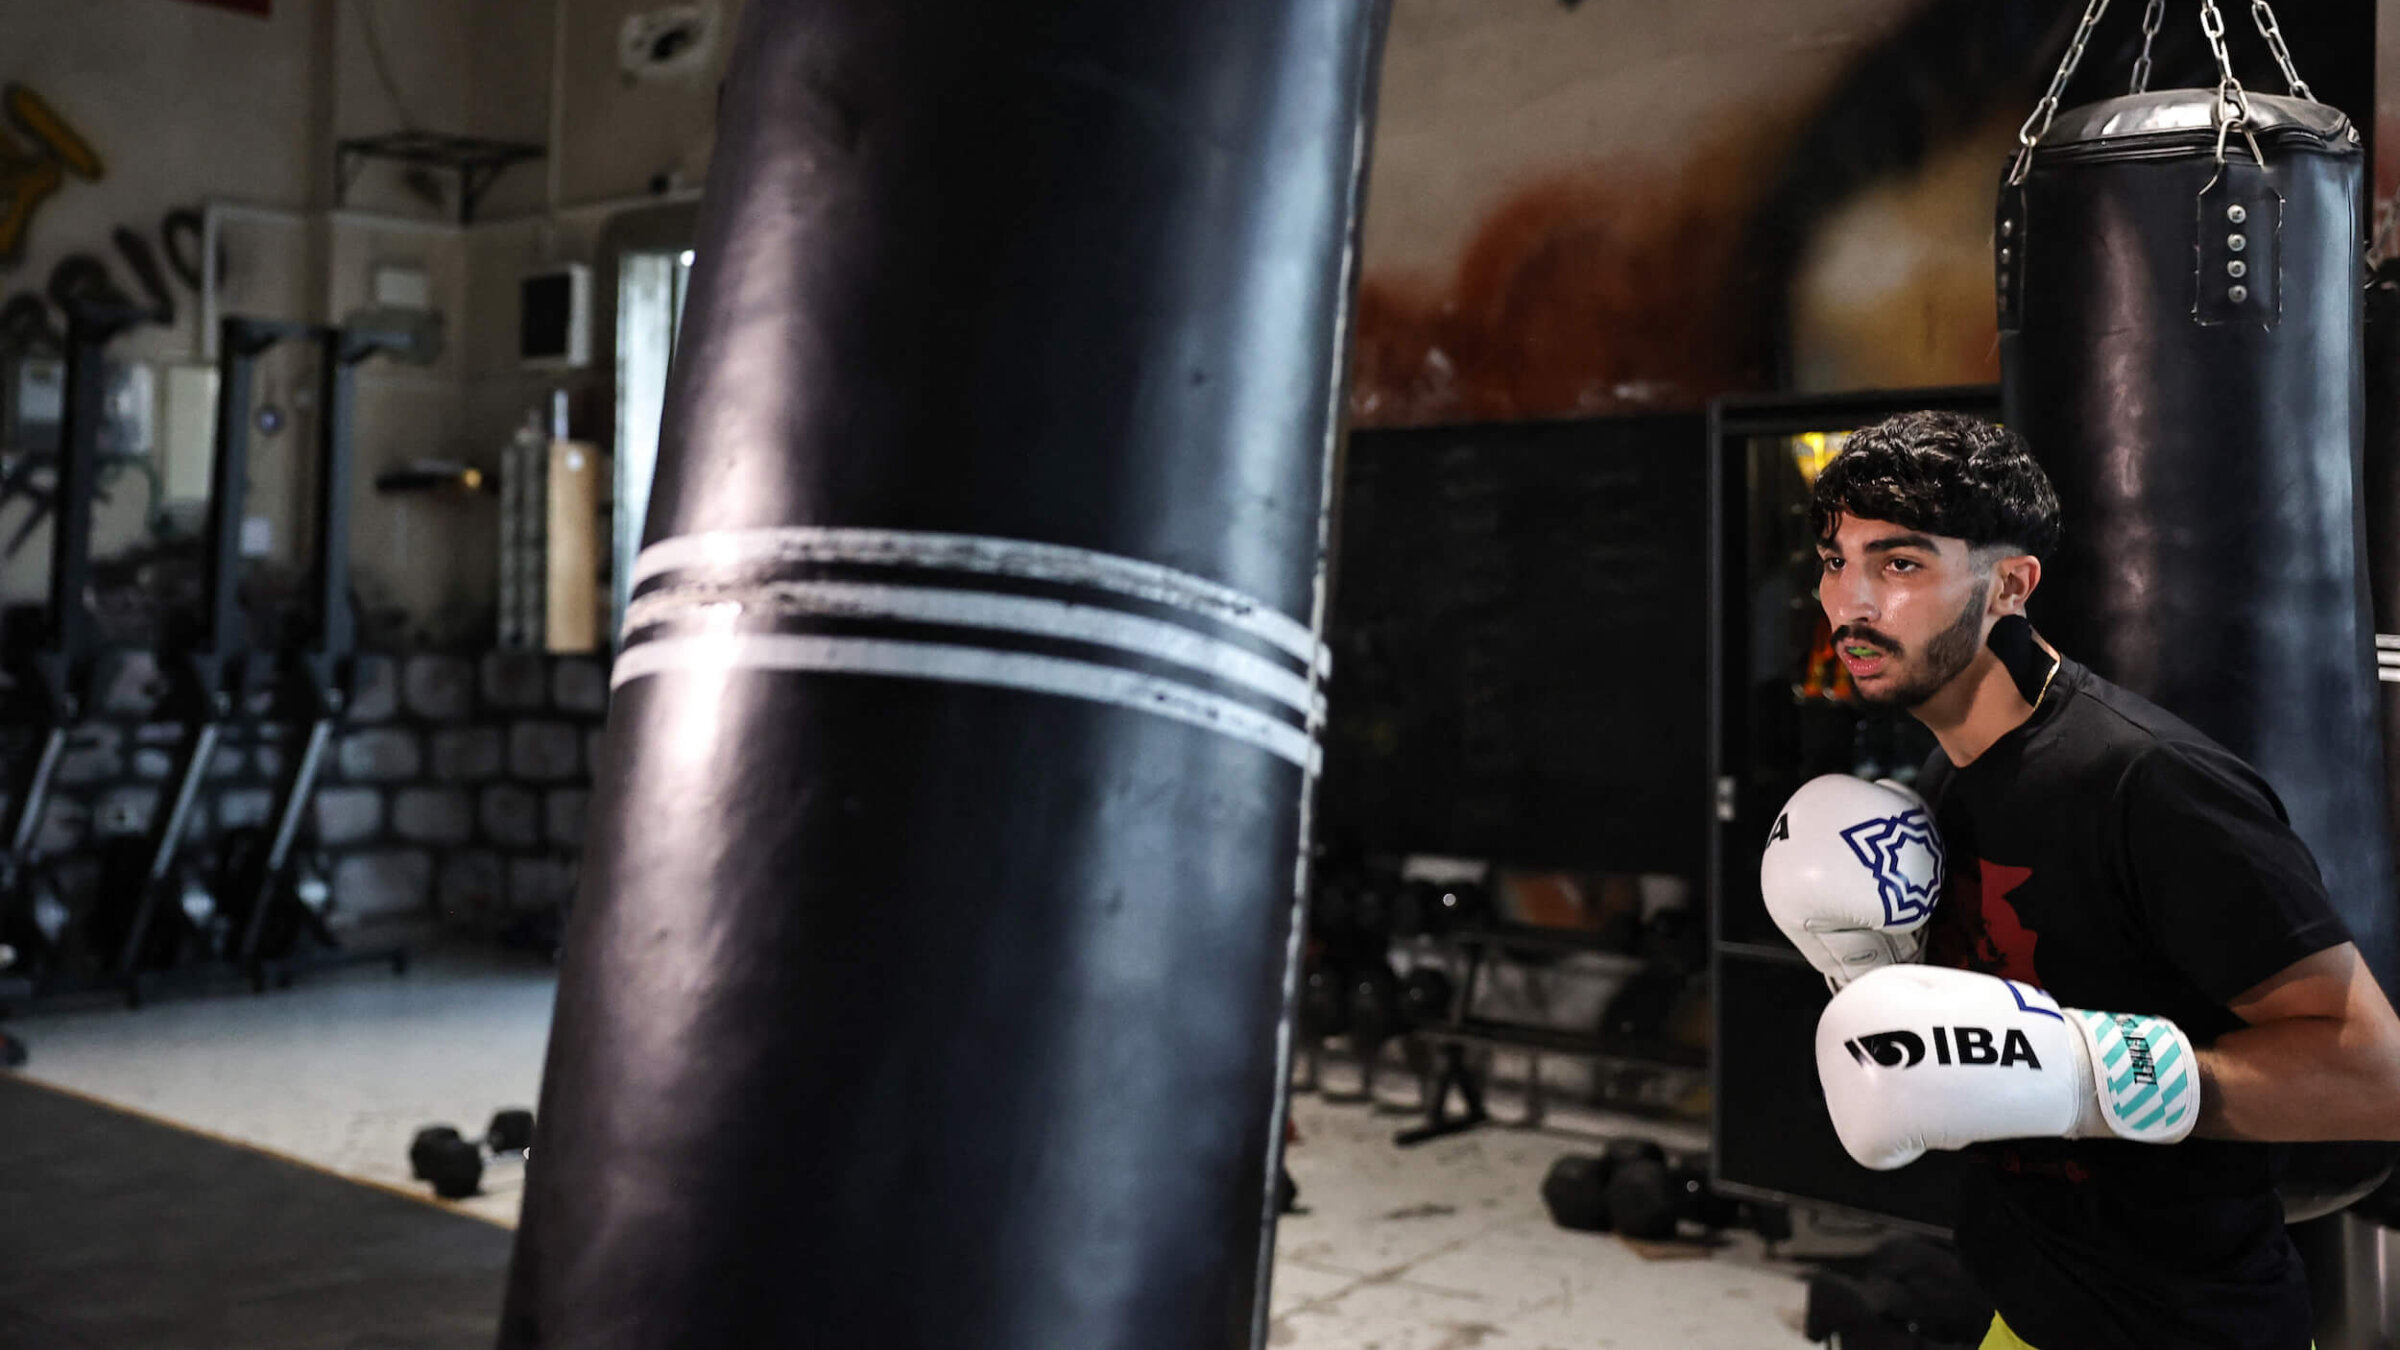 Palestinian lightweight boxer Waseem Abu Sal training at a gym in Ramallah in the occupied West Bank, as part of his preparations after qualifying for the 2024 Paris Olympic games. 